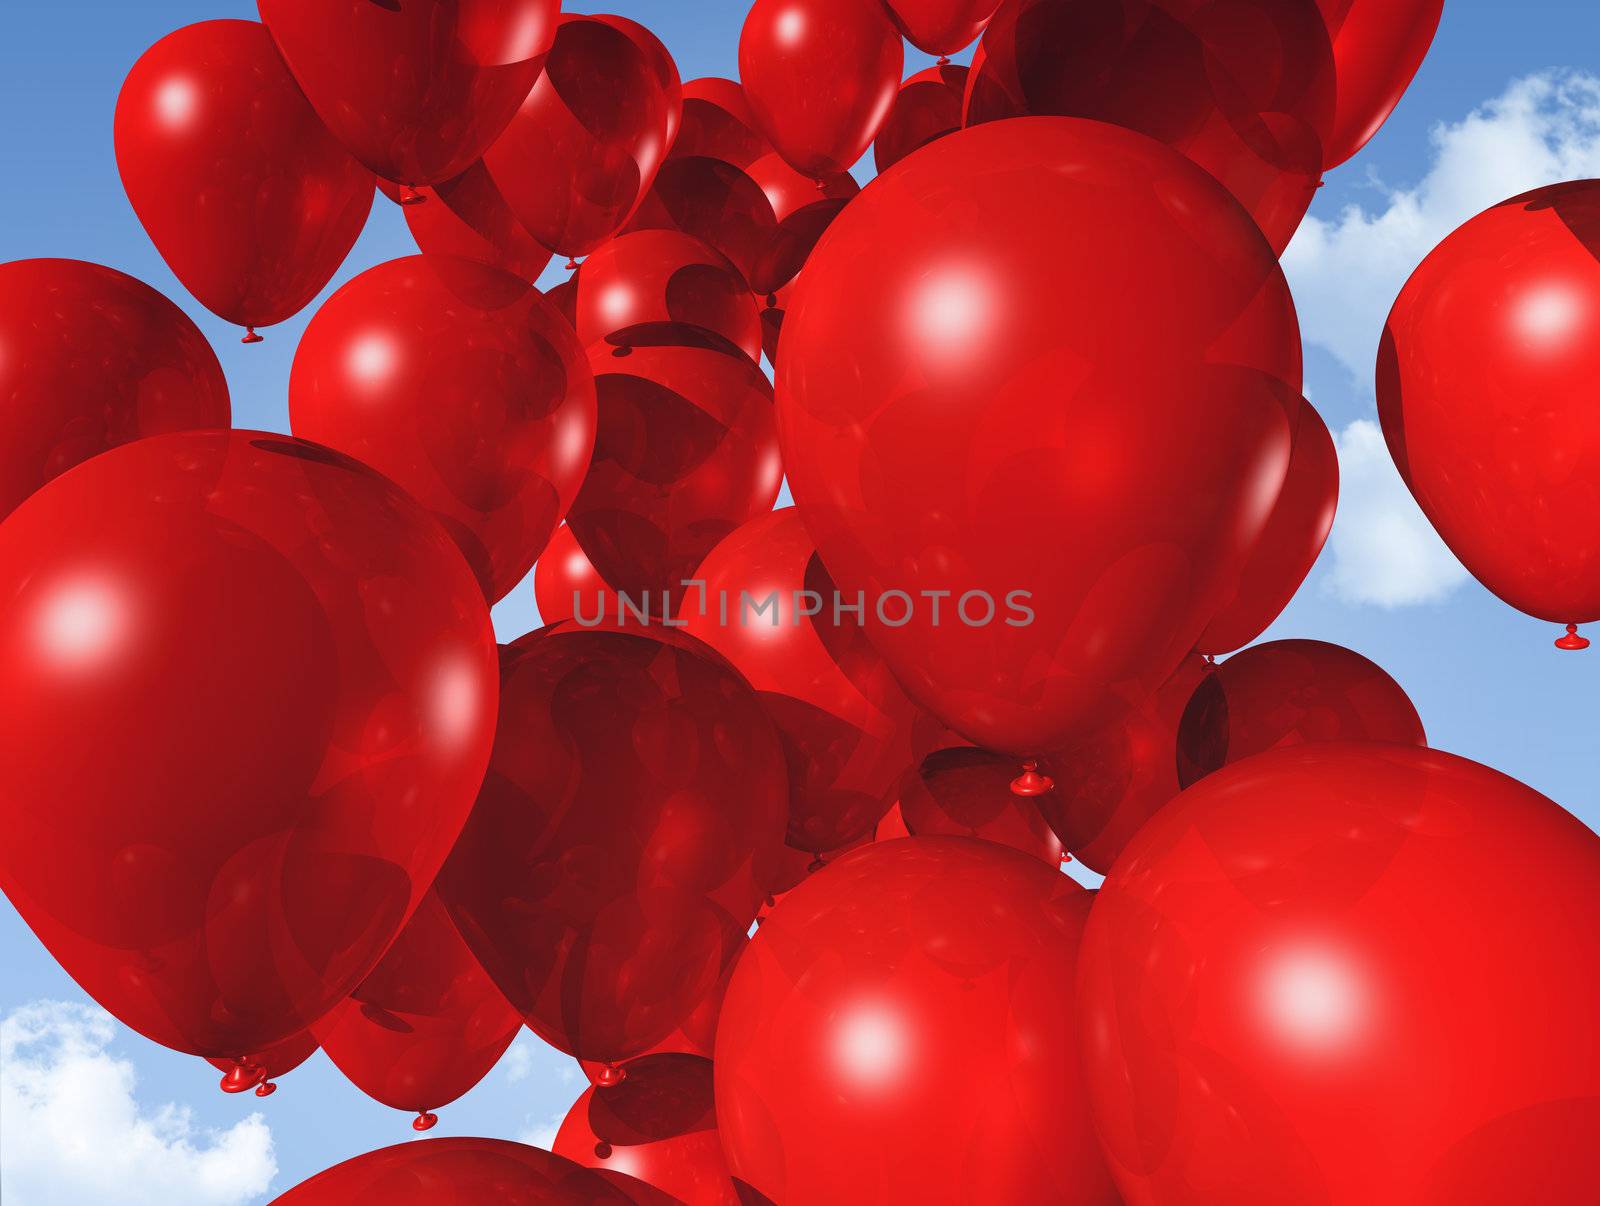 red balloons on a blue sky by daboost